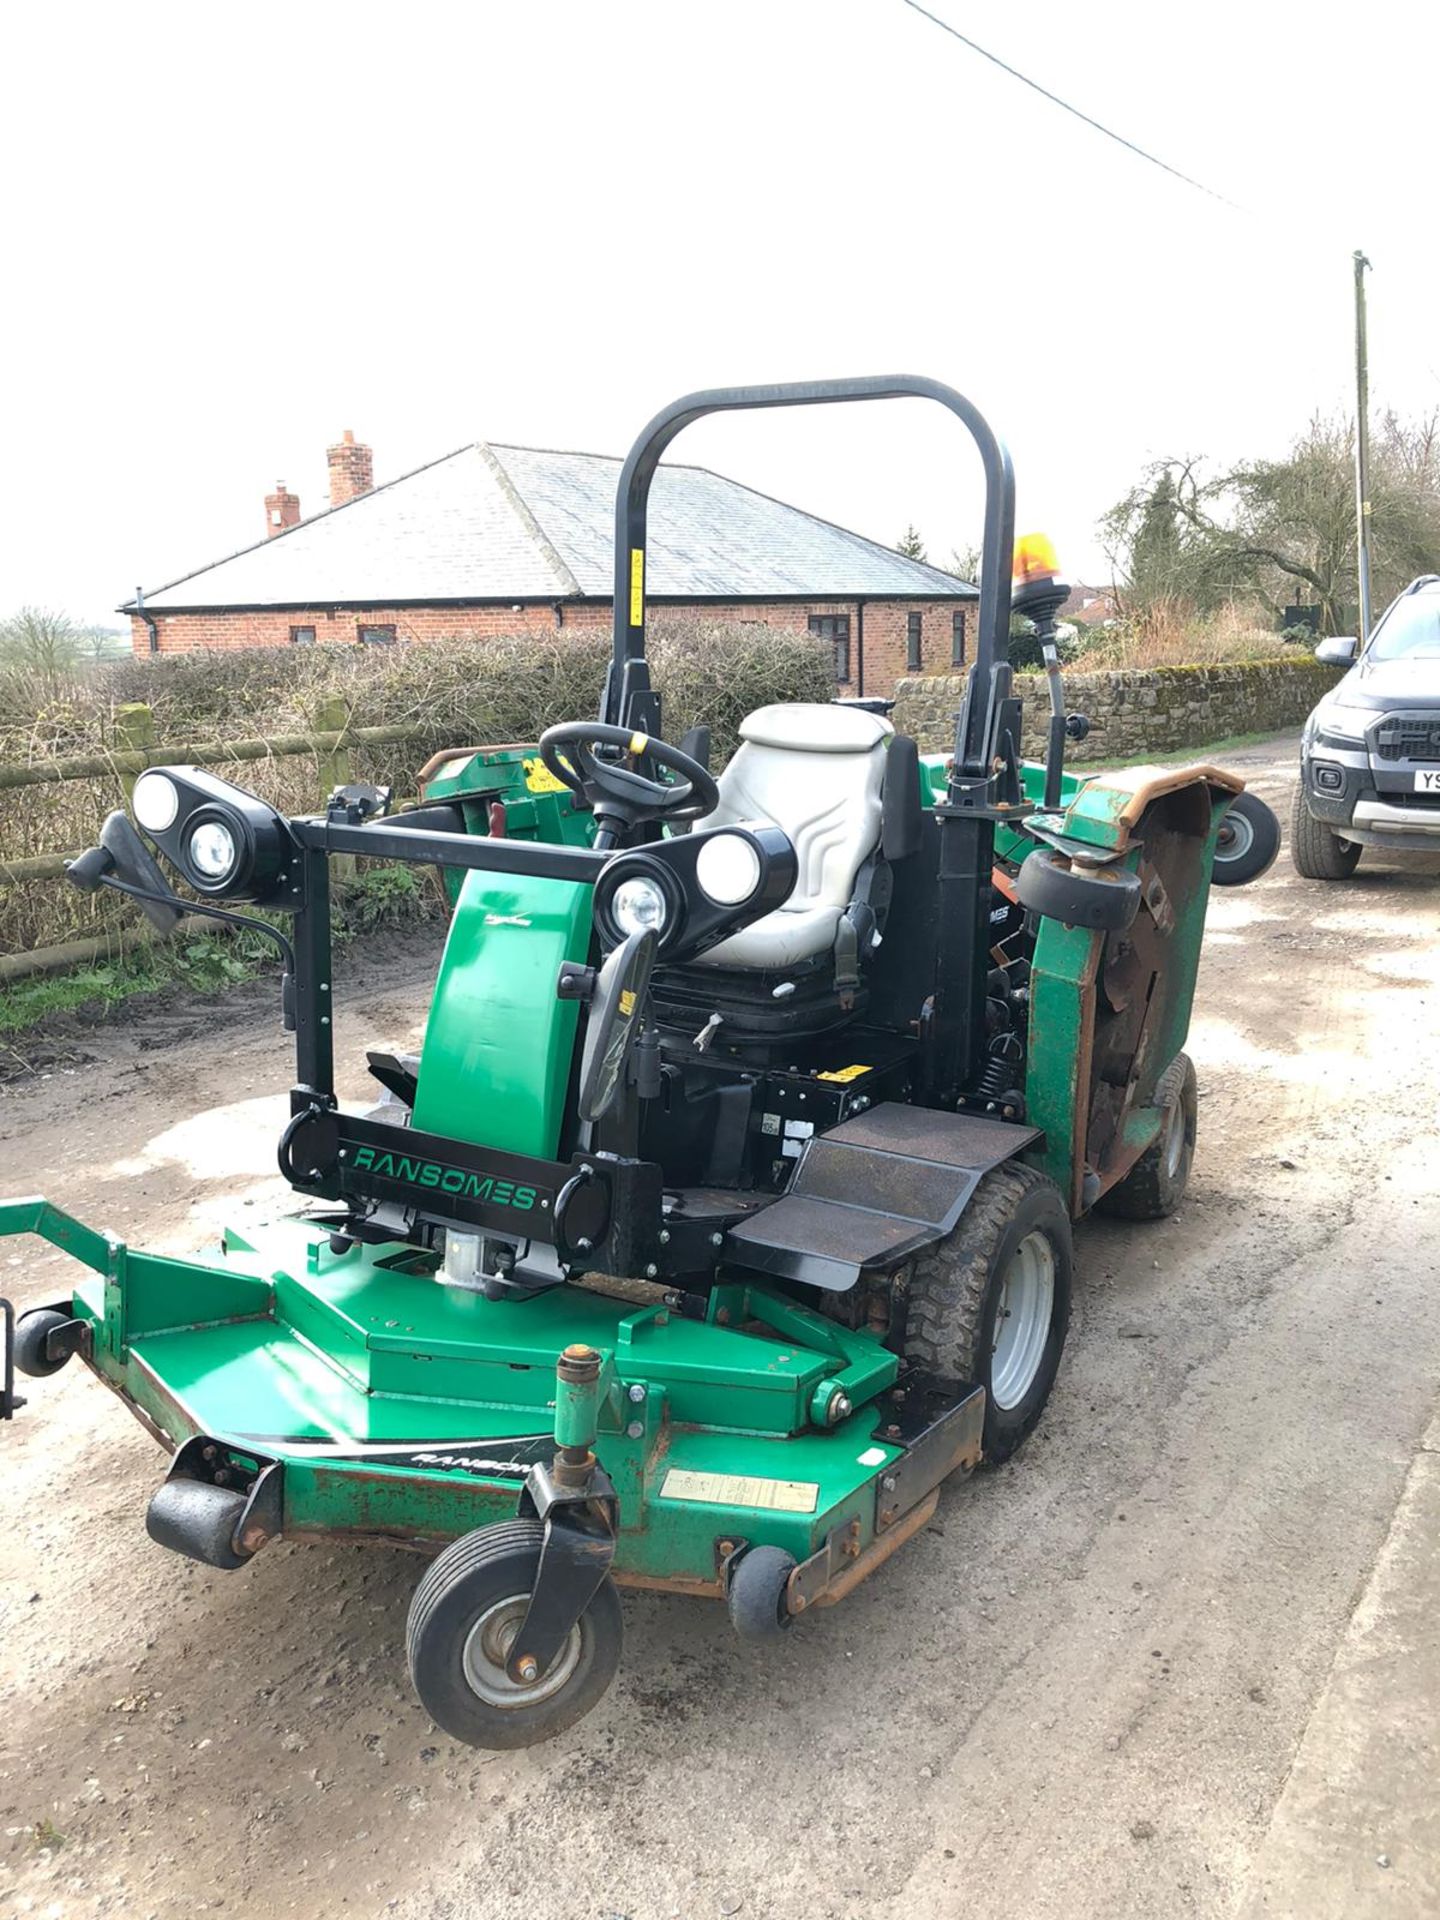 RANSOMES HR6010 BATWING RIDE ON LAWN MOWER, YEAR 2013/62 PLATE, 4 WHEEL DRIVE *PLUS VAT* - Image 2 of 5